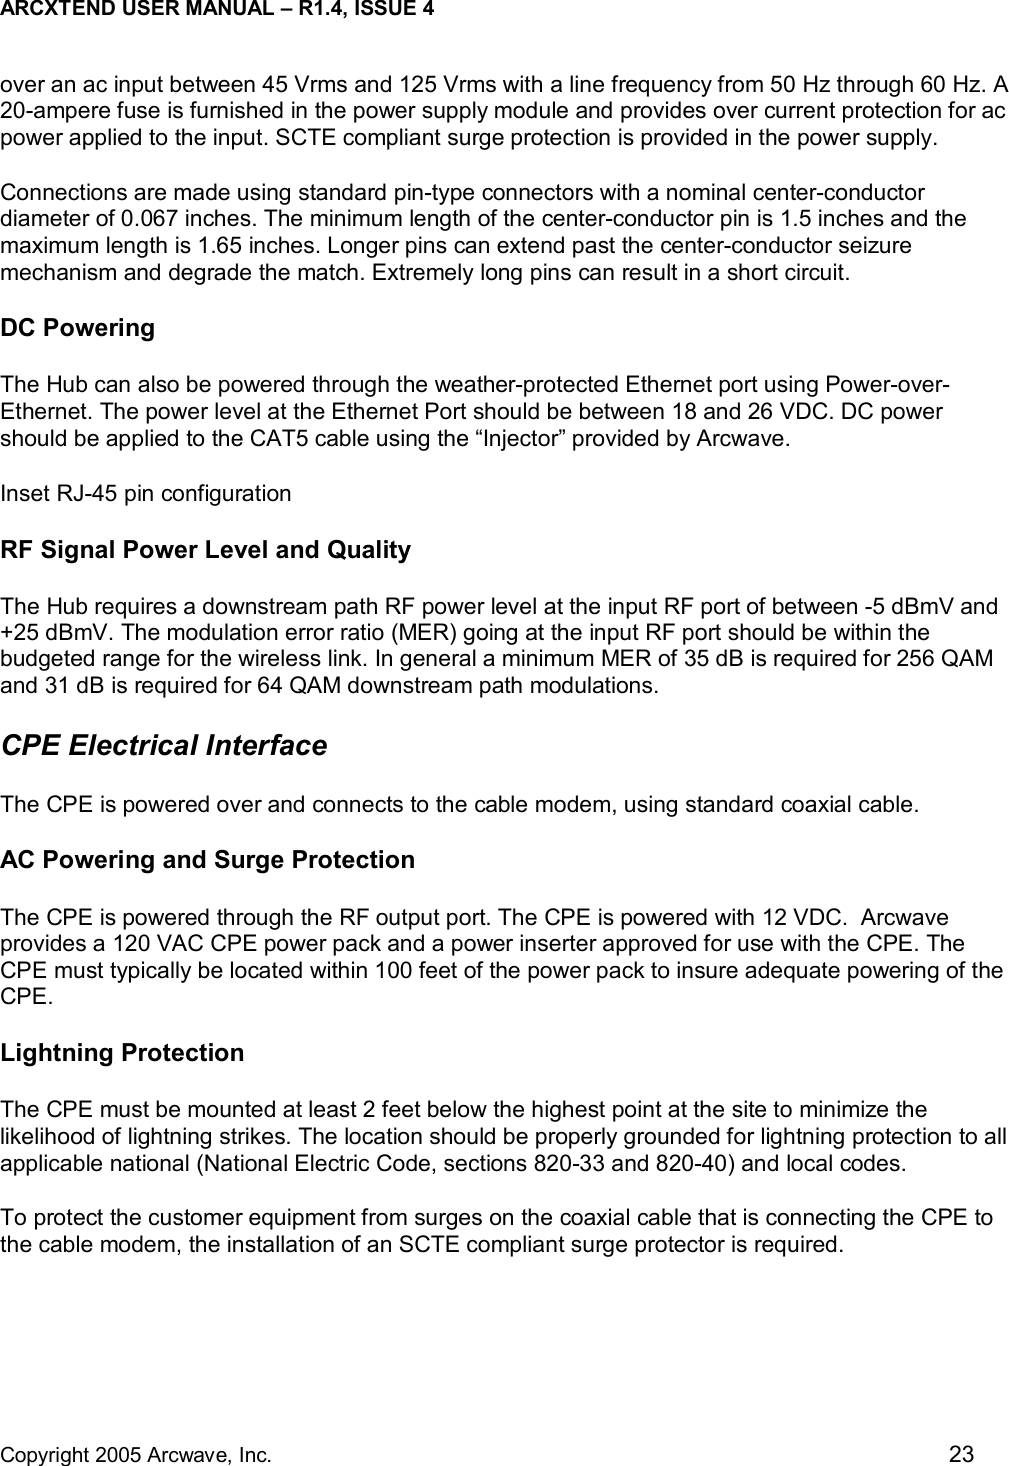 ARCXTEND USER MANUAL – R1.4, ISSUE 4  Copyright 2005 Arcwave, Inc.    23 over an ac input between 45 Vrms and 125 Vrms with a line frequency from 50 Hz through 60 Hz. A 20-ampere fuse is furnished in the power supply module and provides over current protection for ac power applied to the input. SCTE compliant surge protection is provided in the power supply. Connections are made using standard pin-type connectors with a nominal center-conductor diameter of 0.067 inches. The minimum length of the center-conductor pin is 1.5 inches and the maximum length is 1.65 inches. Longer pins can extend past the center-conductor seizure mechanism and degrade the match. Extremely long pins can result in a short circuit. DC Powering The Hub can also be powered through the weather-protected Ethernet port using Power-over-Ethernet. The power level at the Ethernet Port should be between 18 and 26 VDC. DC power should be applied to the CAT5 cable using the “Injector” provided by Arcwave.  Inset RJ-45 pin configuration RF Signal Power Level and Quality The Hub requires a downstream path RF power level at the input RF port of between -5 dBmV and +25 dBmV. The modulation error ratio (MER) going at the input RF port should be within the budgeted range for the wireless link. In general a minimum MER of 35 dB is required for 256 QAM and 31 dB is required for 64 QAM downstream path modulations. CPE Electrical Interface The CPE is powered over and connects to the cable modem, using standard coaxial cable.  AC Powering and Surge Protection The CPE is powered through the RF output port. The CPE is powered with 12 VDC.  Arcwave provides a 120 VAC CPE power pack and a power inserter approved for use with the CPE. The CPE must typically be located within 100 feet of the power pack to insure adequate powering of the CPE.  Lightning Protection The CPE must be mounted at least 2 feet below the highest point at the site to minimize the likelihood of lightning strikes. The location should be properly grounded for lightning protection to all applicable national (National Electric Code, sections 820-33 and 820-40) and local codes.  To protect the customer equipment from surges on the coaxial cable that is connecting the CPE to the cable modem, the installation of an SCTE compliant surge protector is required.  